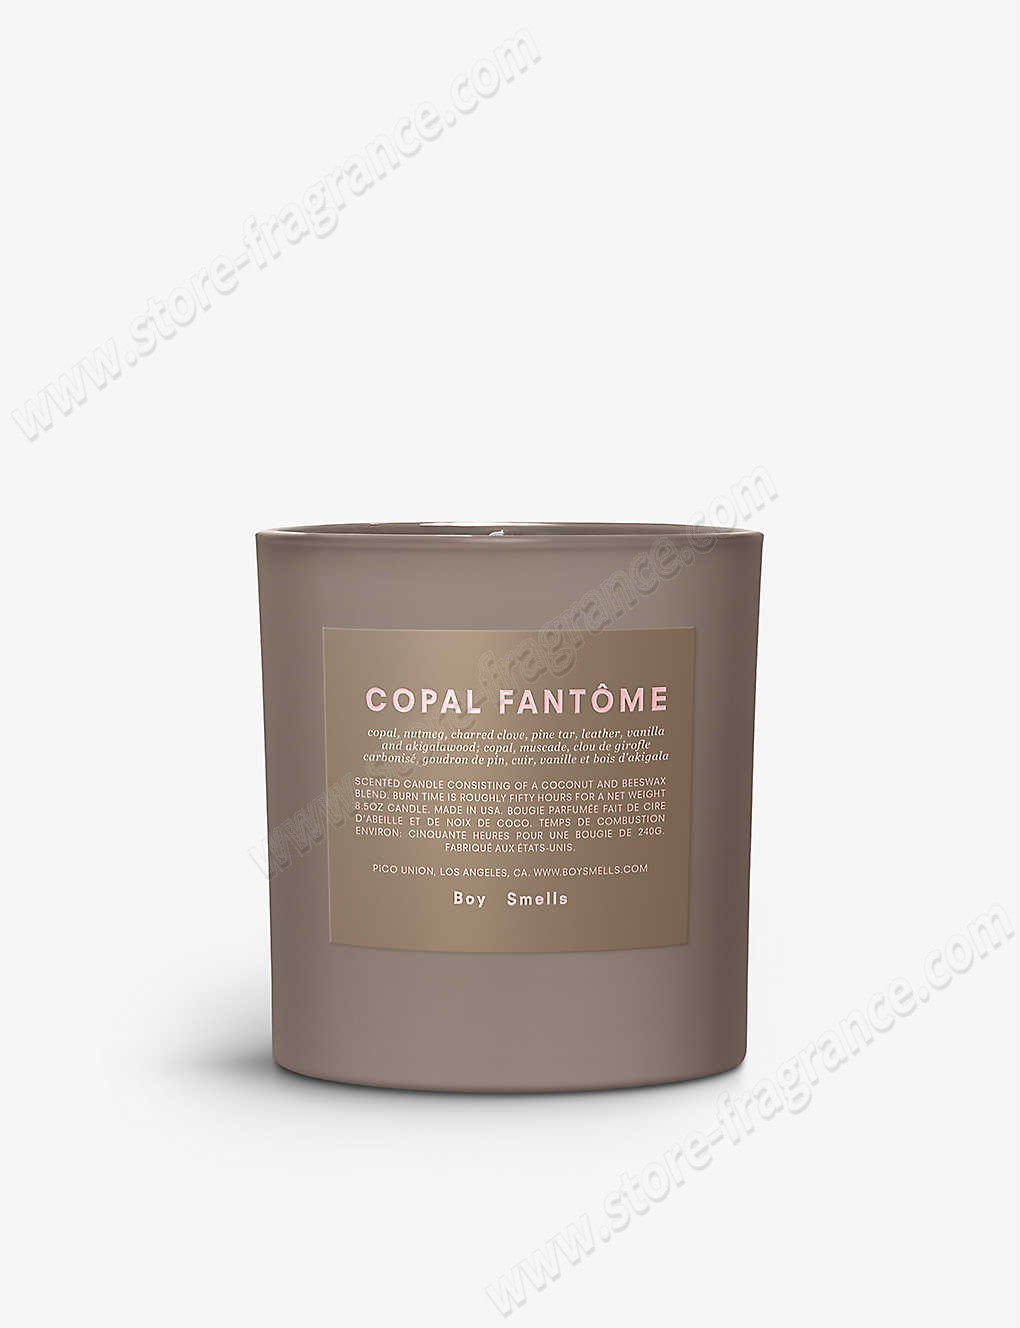 BOY SMELLS/Copal Fantôme scented candle 240g ✿ Discount Store - -0